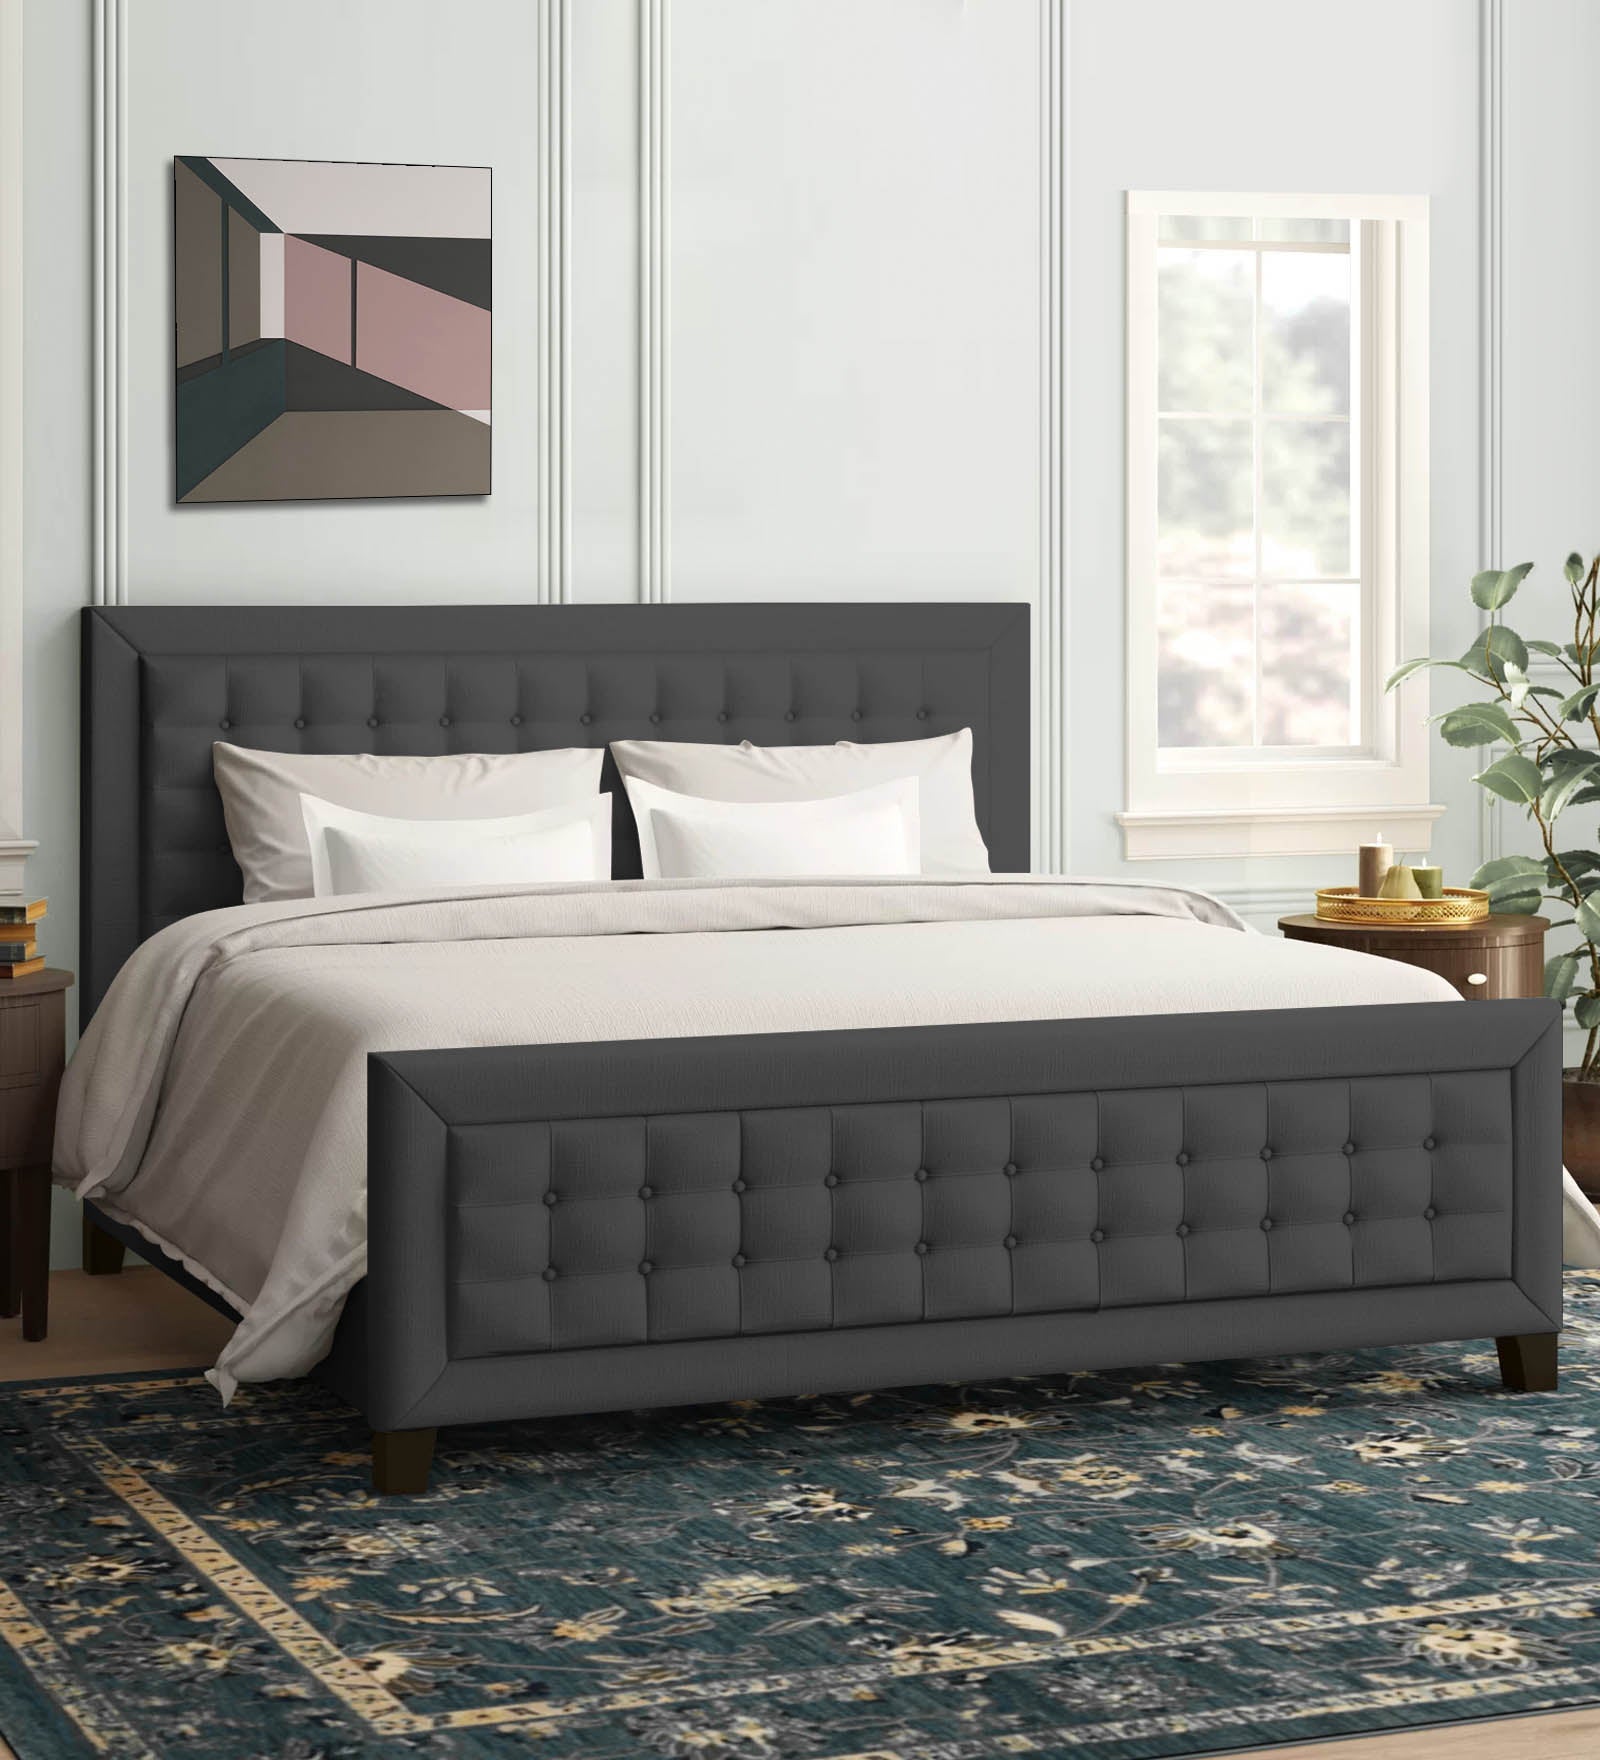 Kaster Fabric King Size Bed In Charcoal Grey Colour